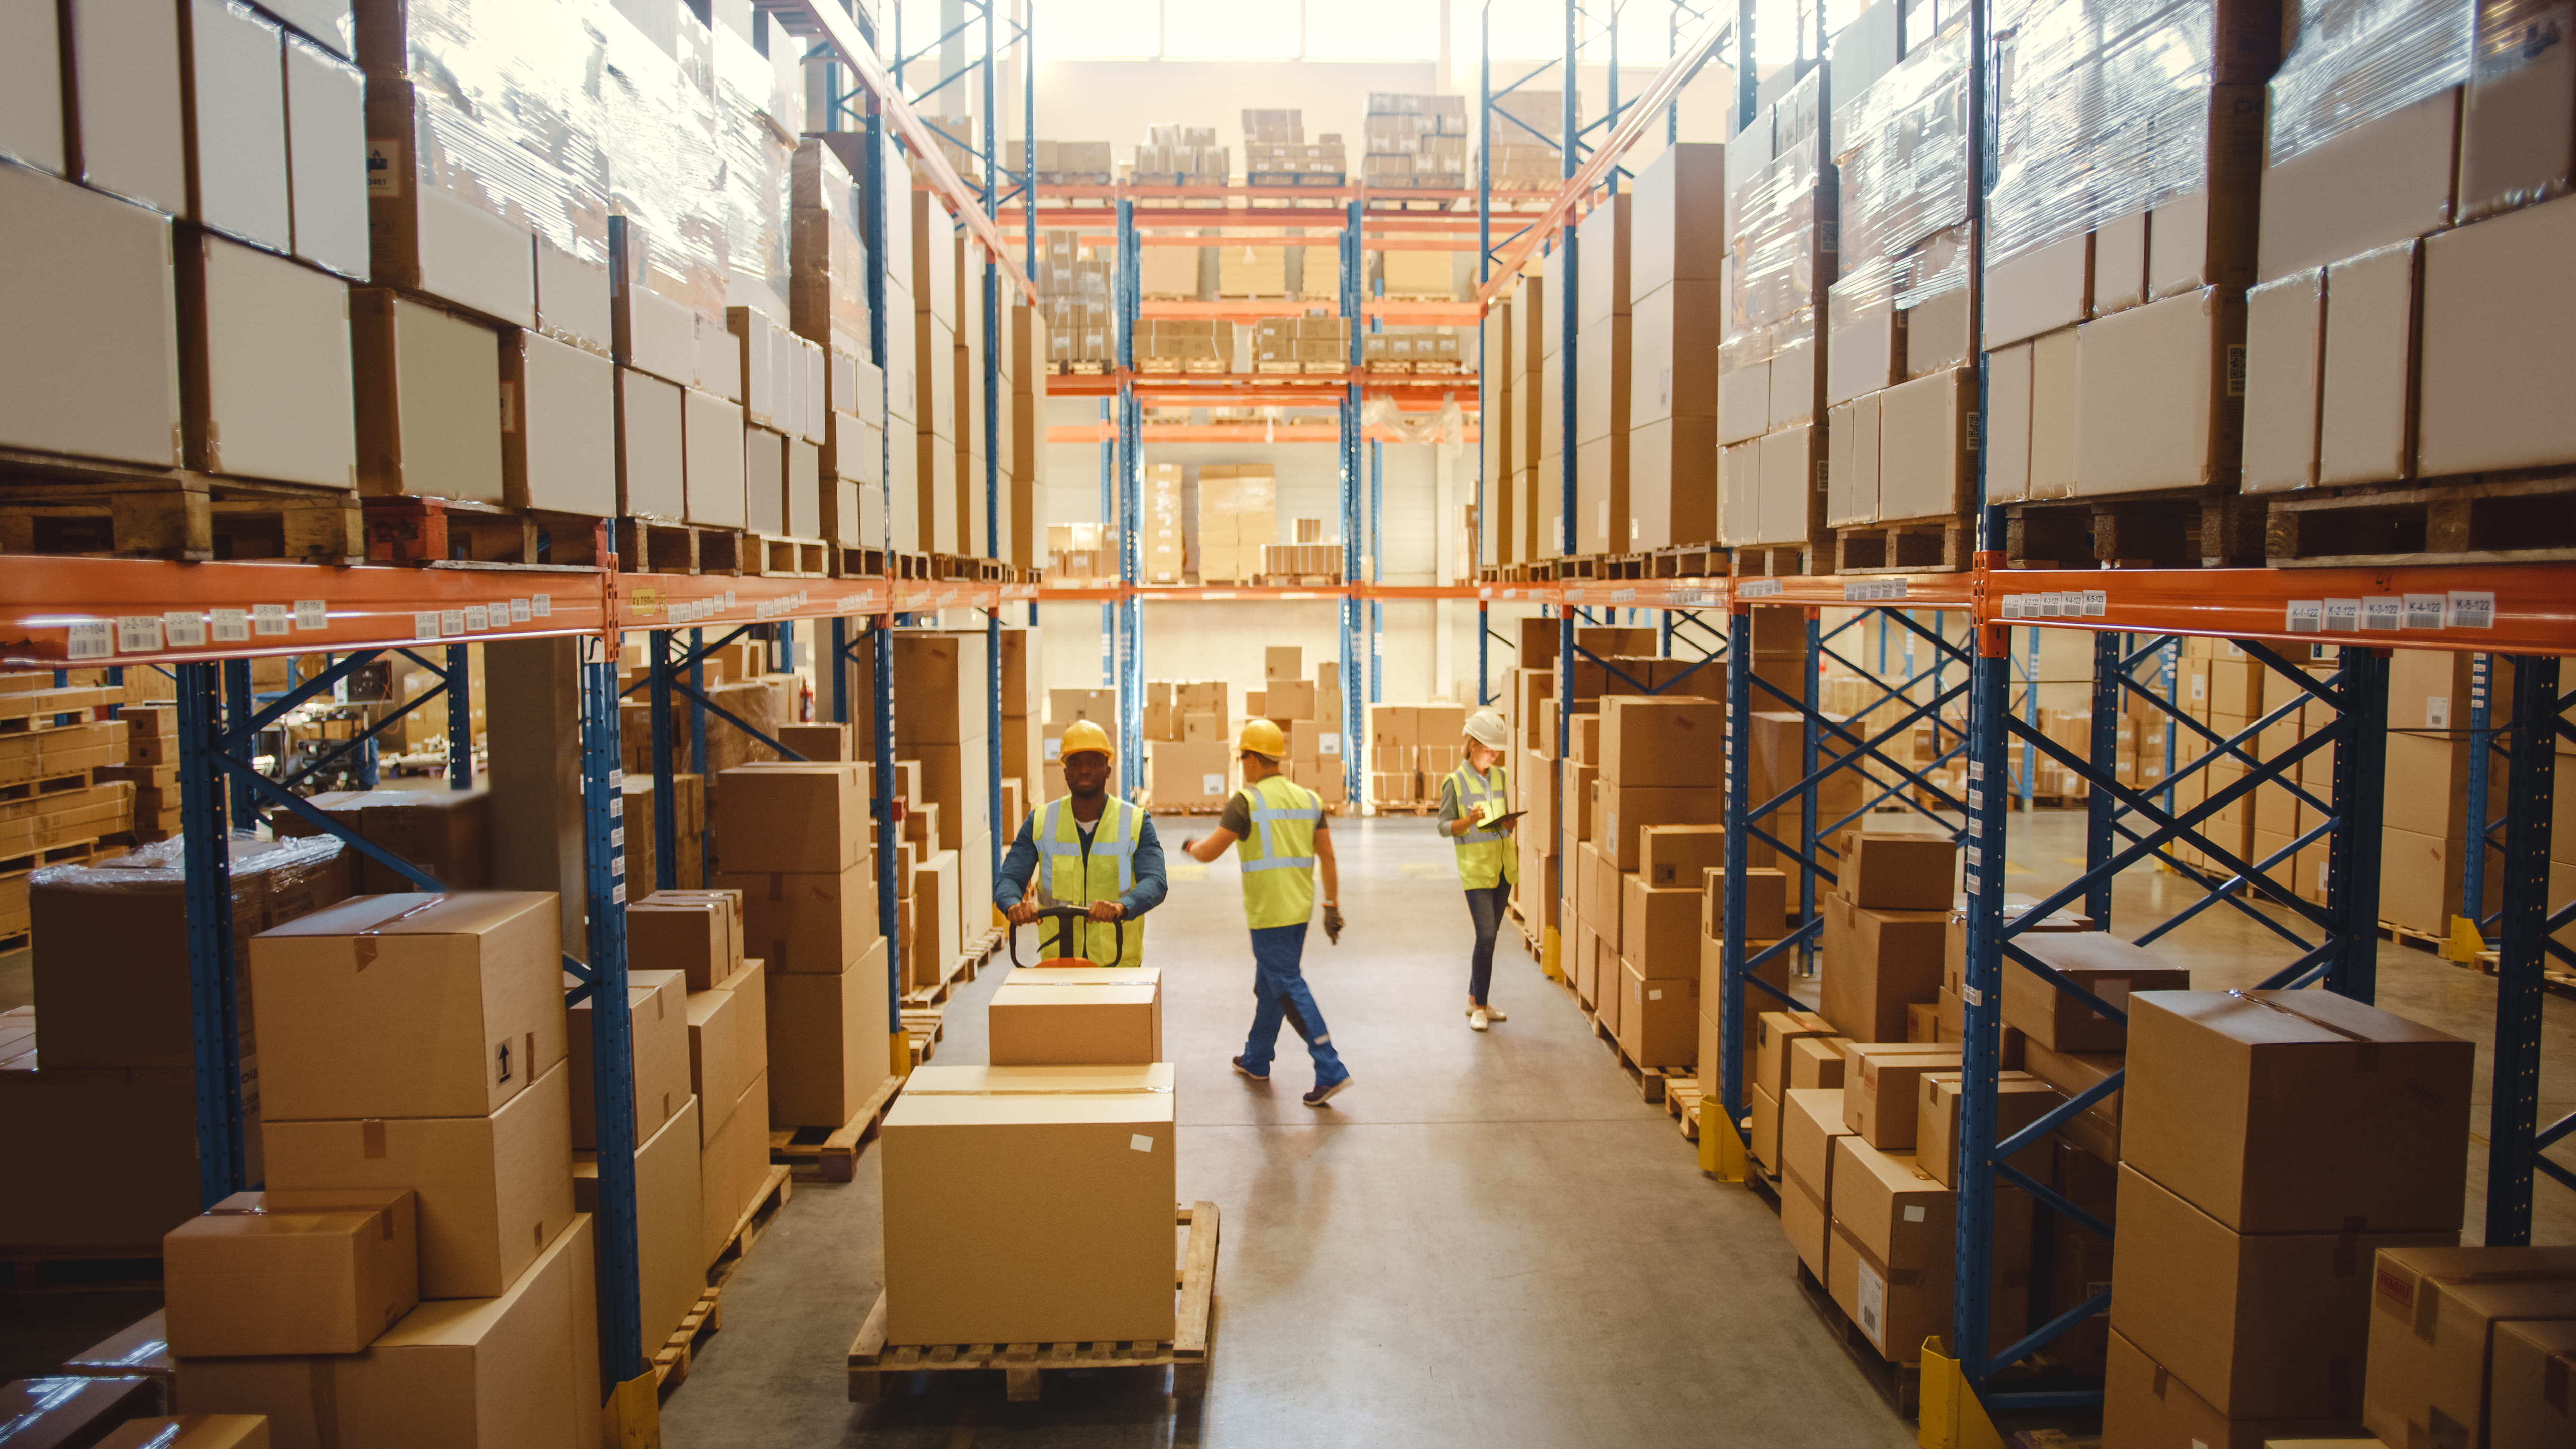 Large warehouse with high shelves filled with boxes and goods. Workers in high-visibility vests are organizing and moving boxes, ensuring efficient operations